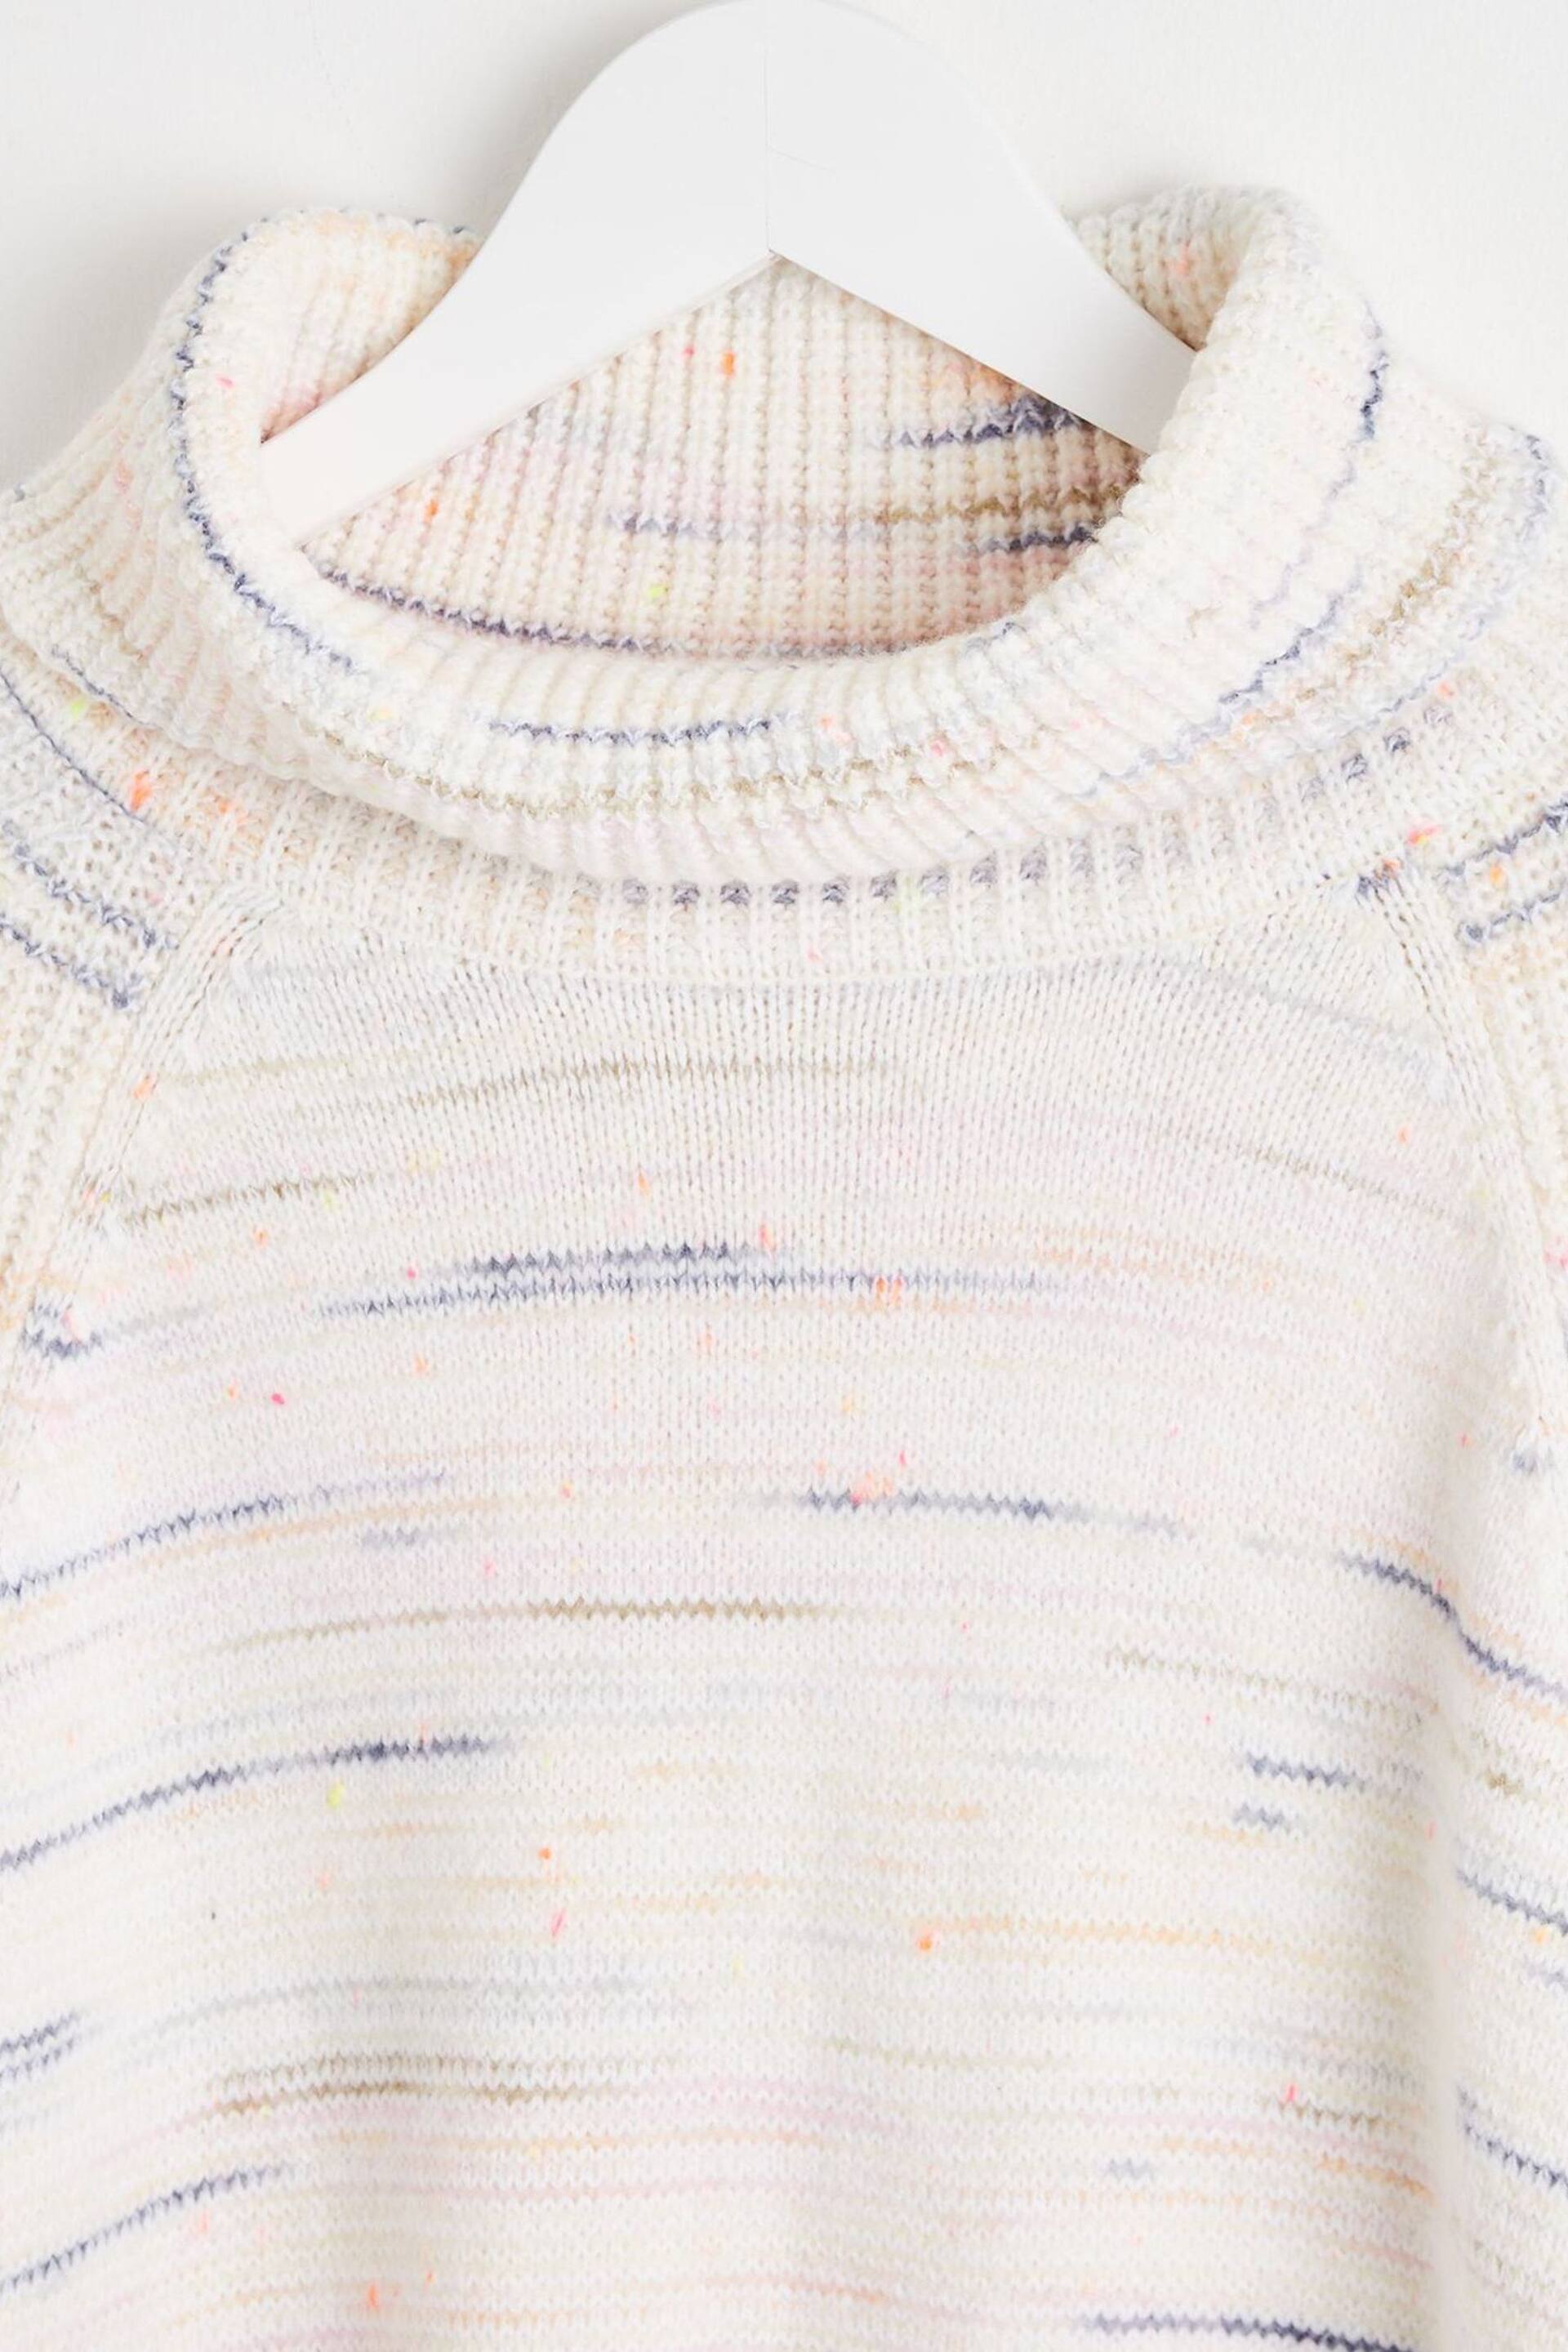 Oliver Bonas Nepped Roll Neck Knitted Cream Jumper - Image 7 of 8